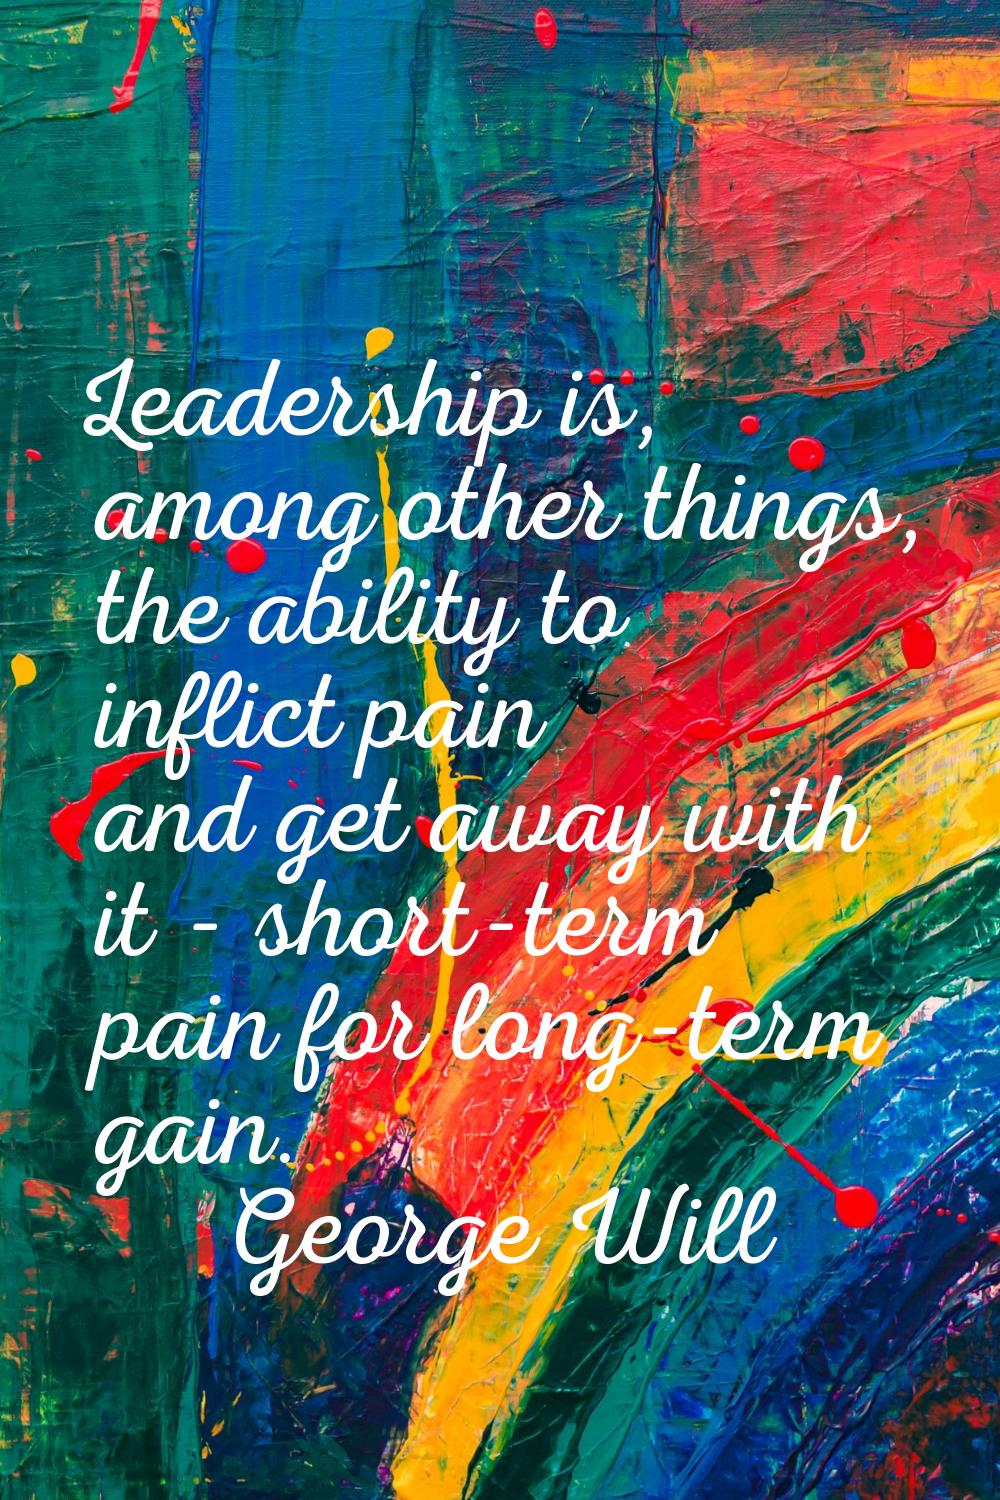 Leadership is, among other things, the ability to inflict pain and get away with it - short-term pa